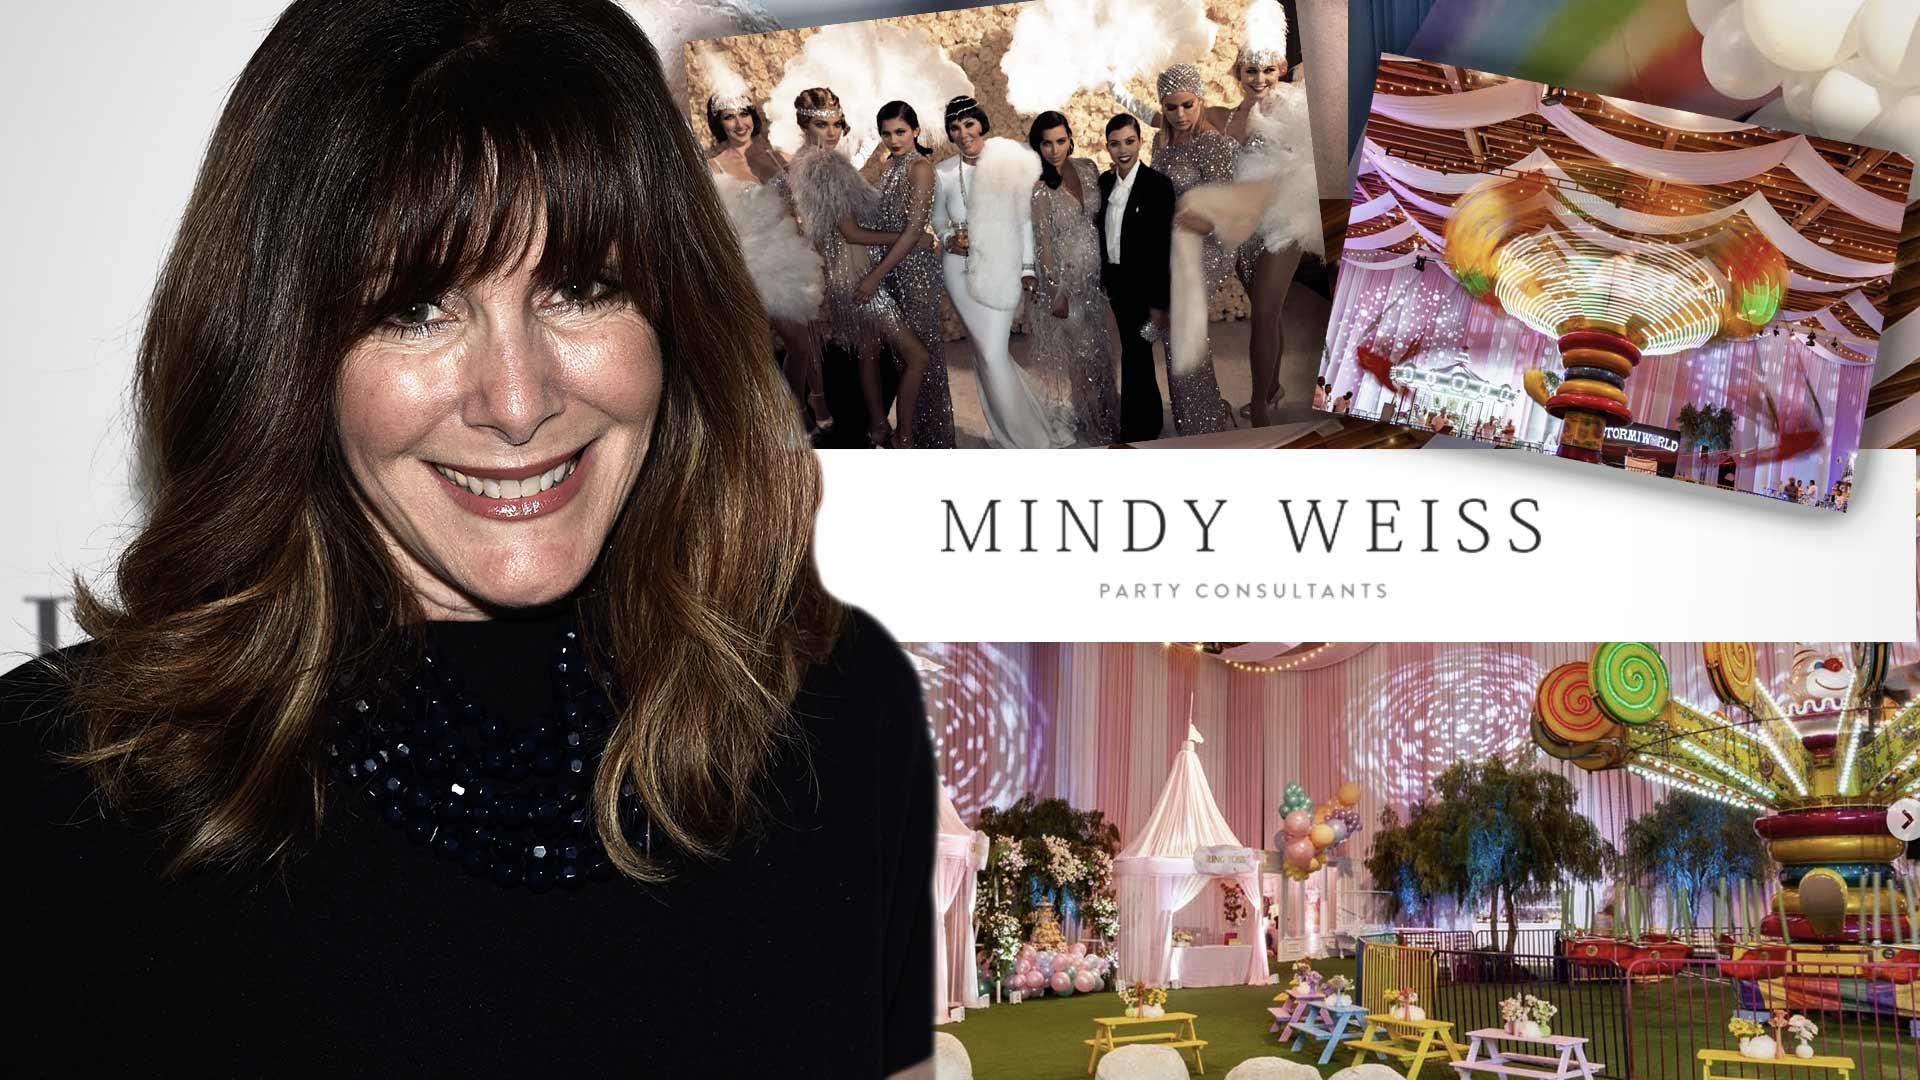 Kardashian Family Event Planner Mindy Weiss Sued by Former Employee for Racial Discrimination